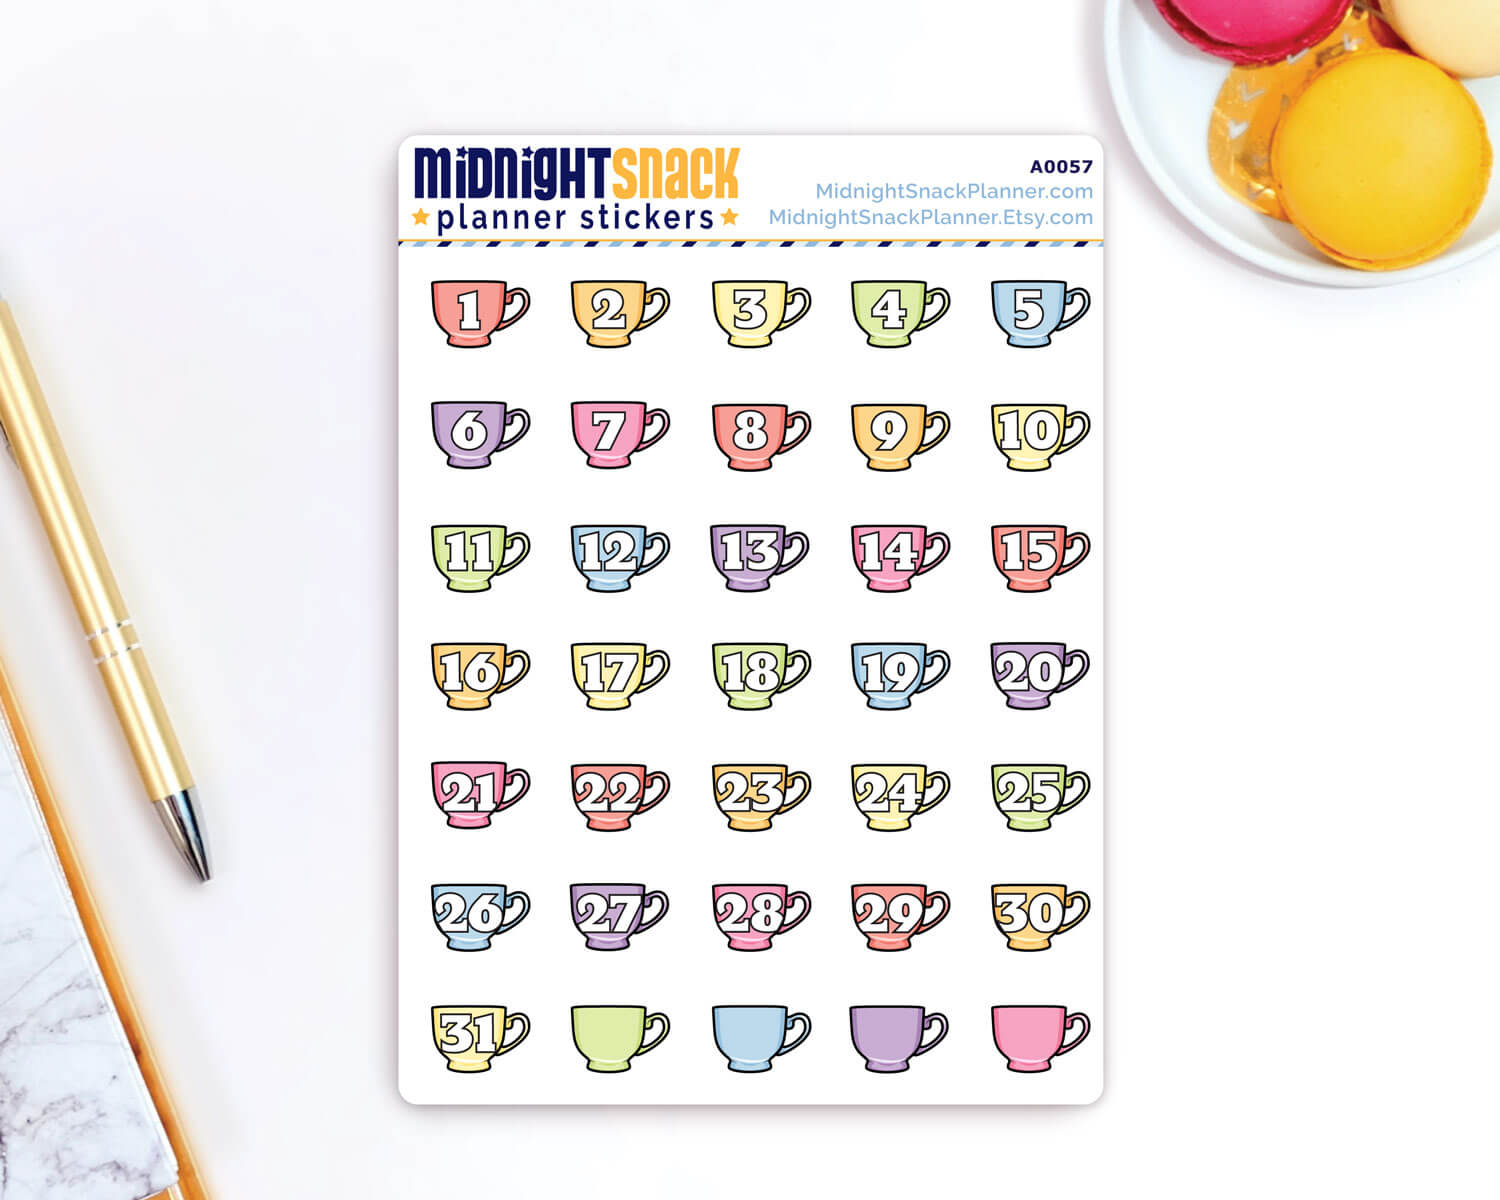 Tea or Coffee Cup Date Cover Planner Stickers from Midnight Snack Planner